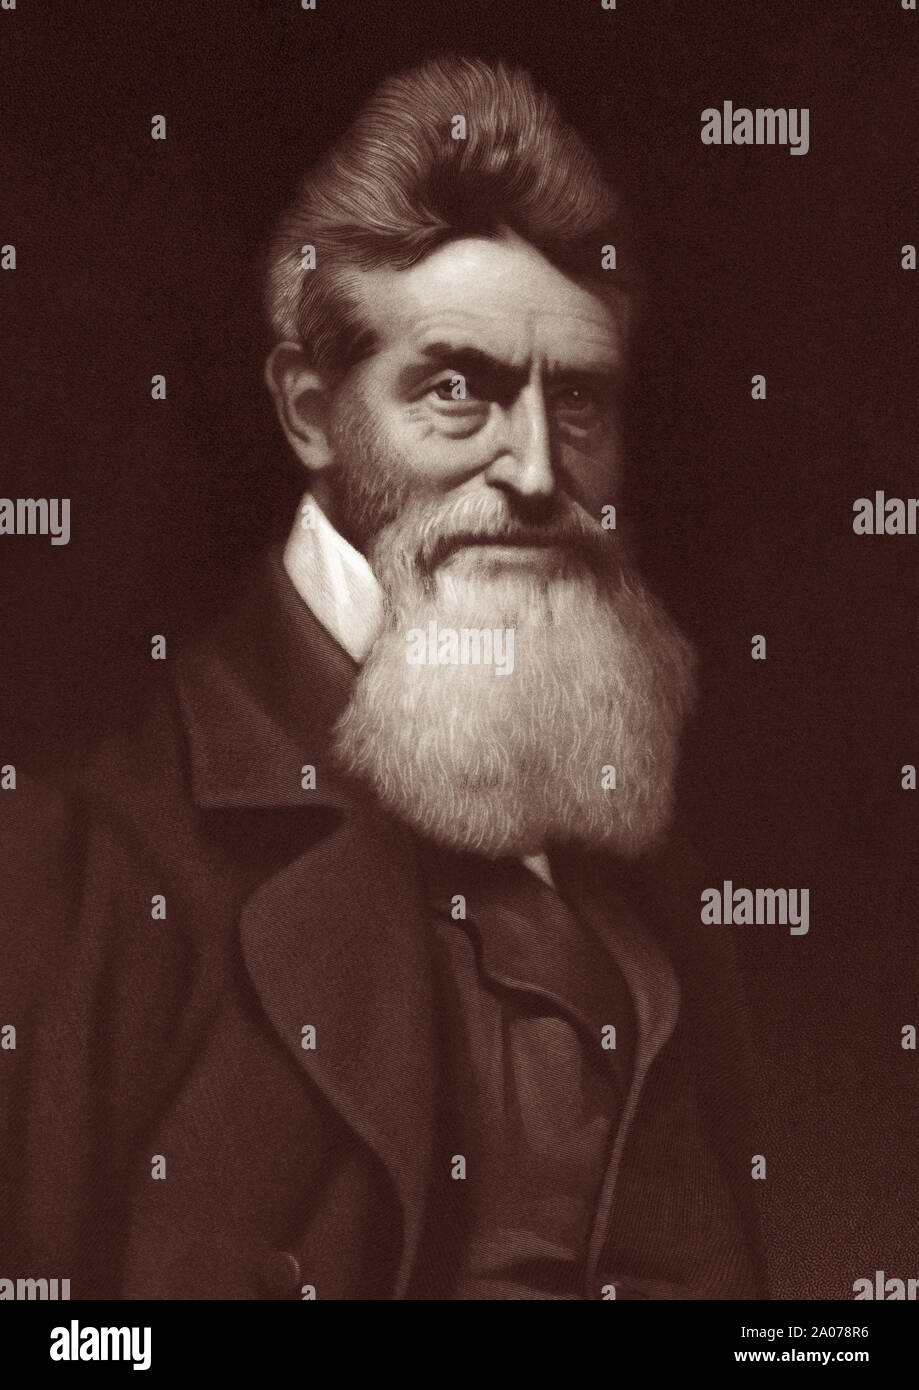 John Brown (1800-1859), American abolitionist who advocated the use of armed insurrection to overthrow the institution of slavery in the United States. Engraved portrait by Sartain from a c1858 daguerreotype attributed to Martin M. Lawrence. Stock Photo